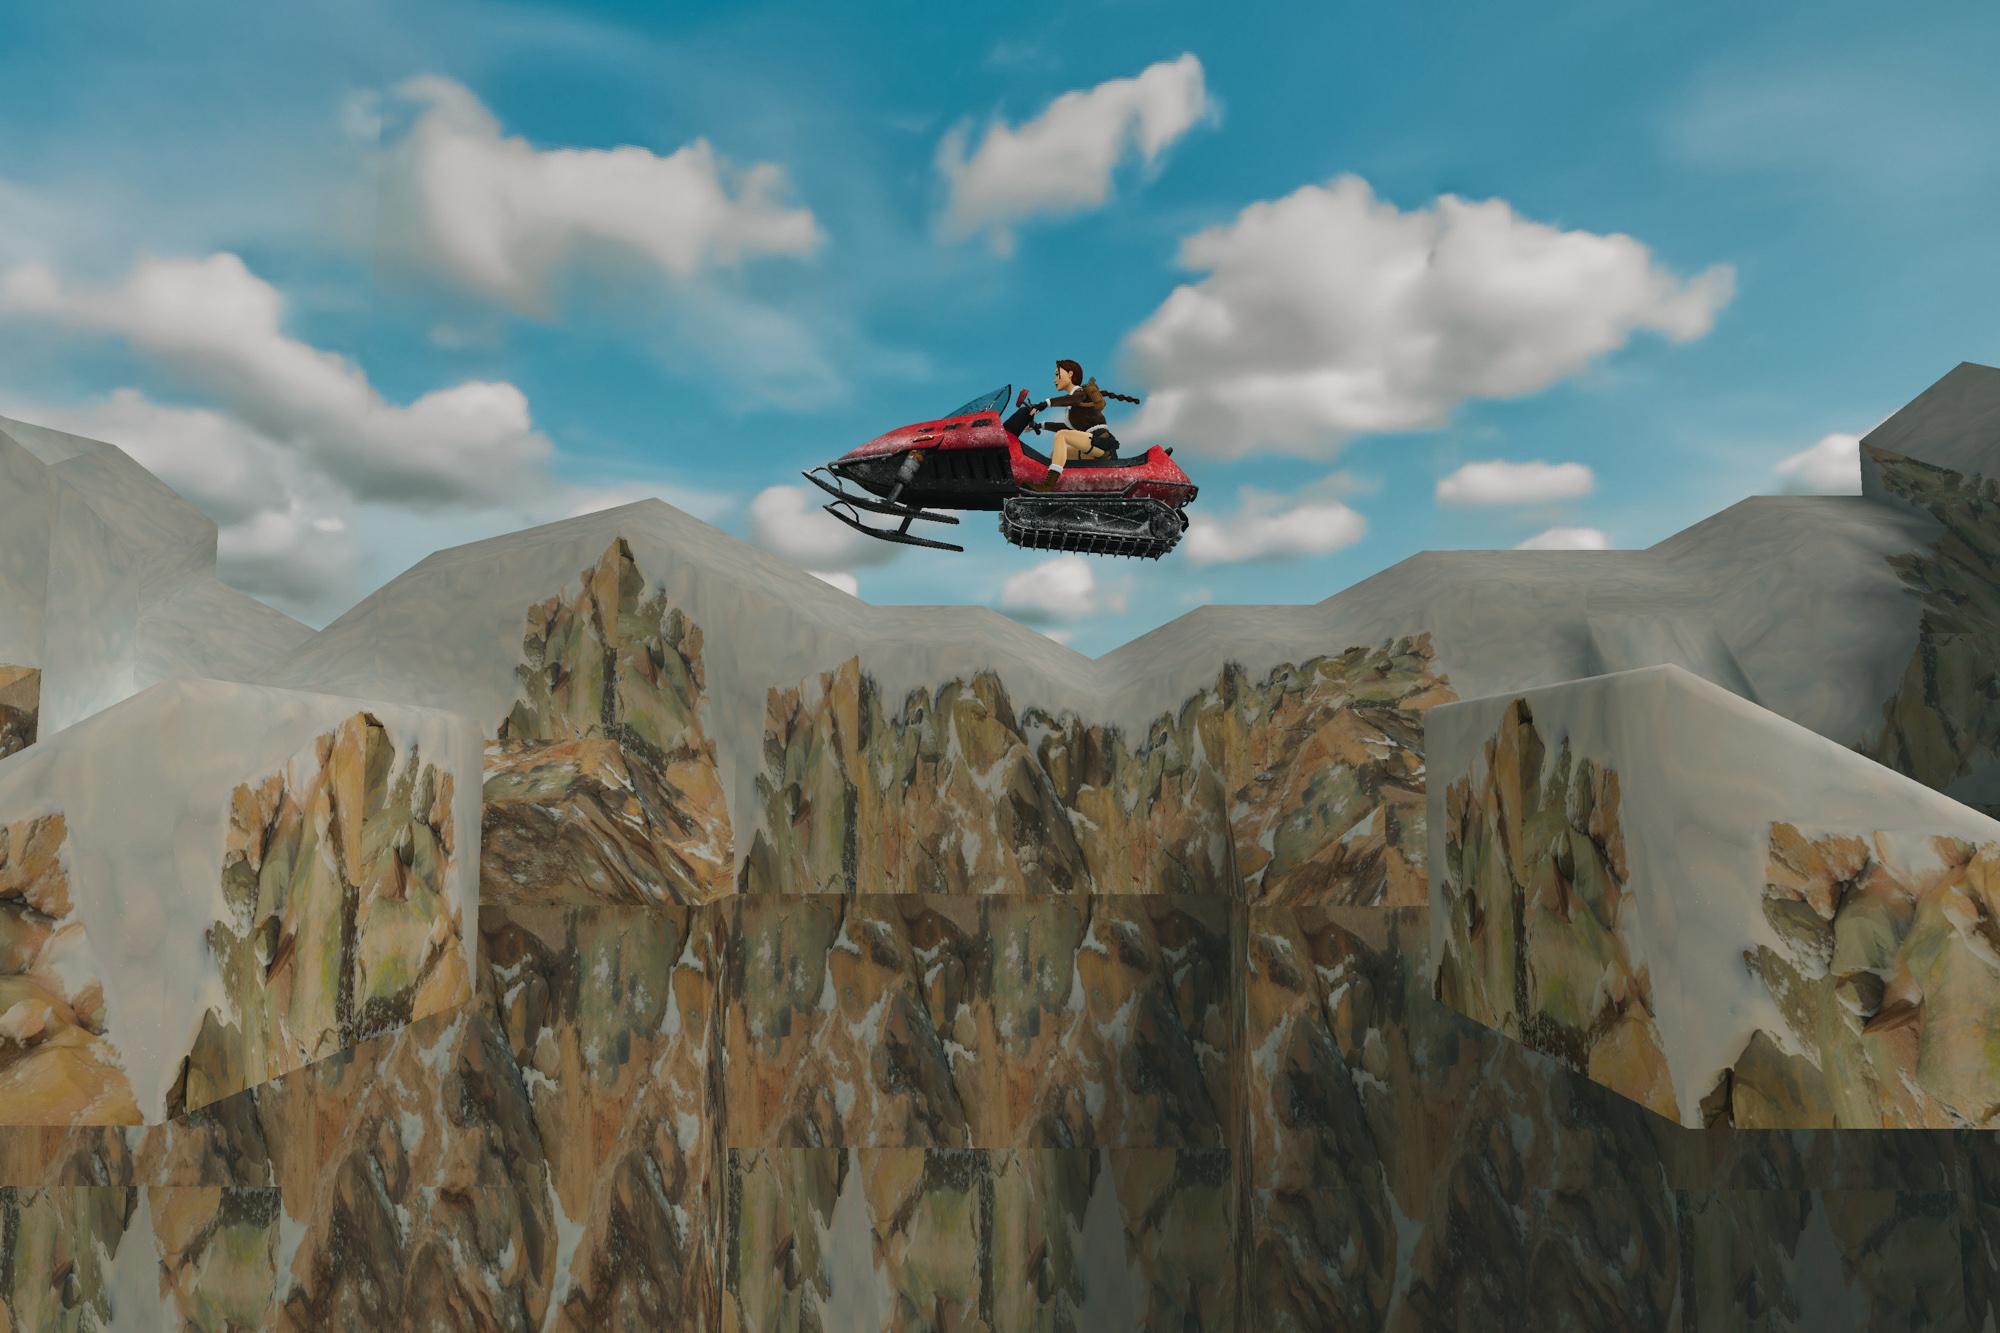 Lara jumping over a large gap in a red snowmobile in Tibetan Foothills